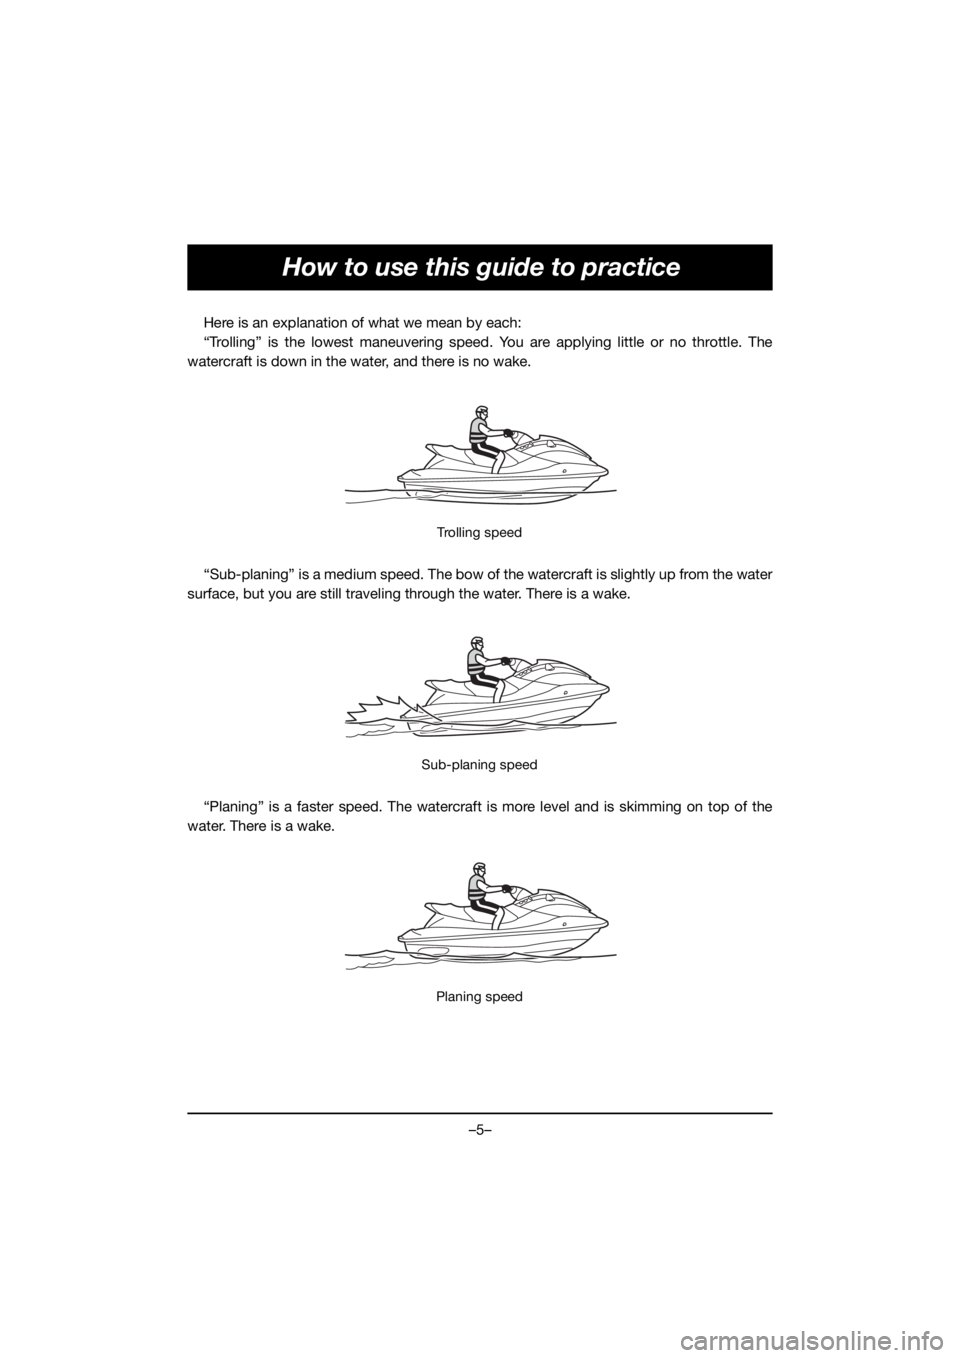 YAMAHA GP1800R SVHO 2020  Notices Demploi (in French) –5–
How to use this guide to practice
Here is an explanation of what we mean by each:
“Trolling” is the lowest maneuvering speed. You are applying little or no throttle. The
watercraft is down